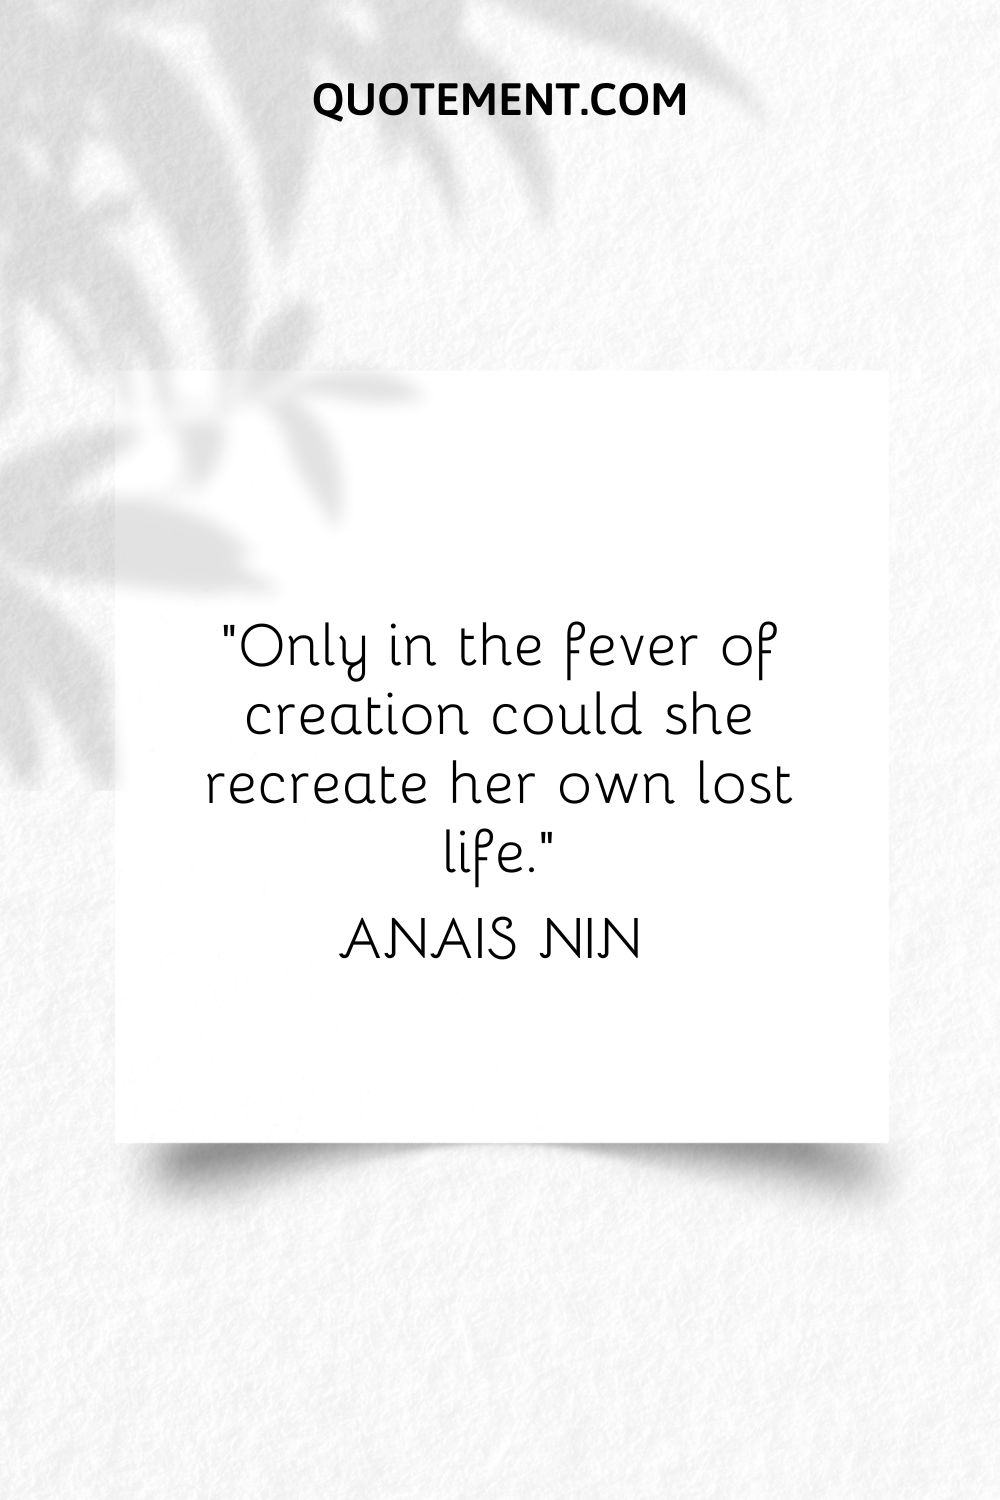 “Only in the fever of creation could she recreate her own lost life.” — Anais Nin